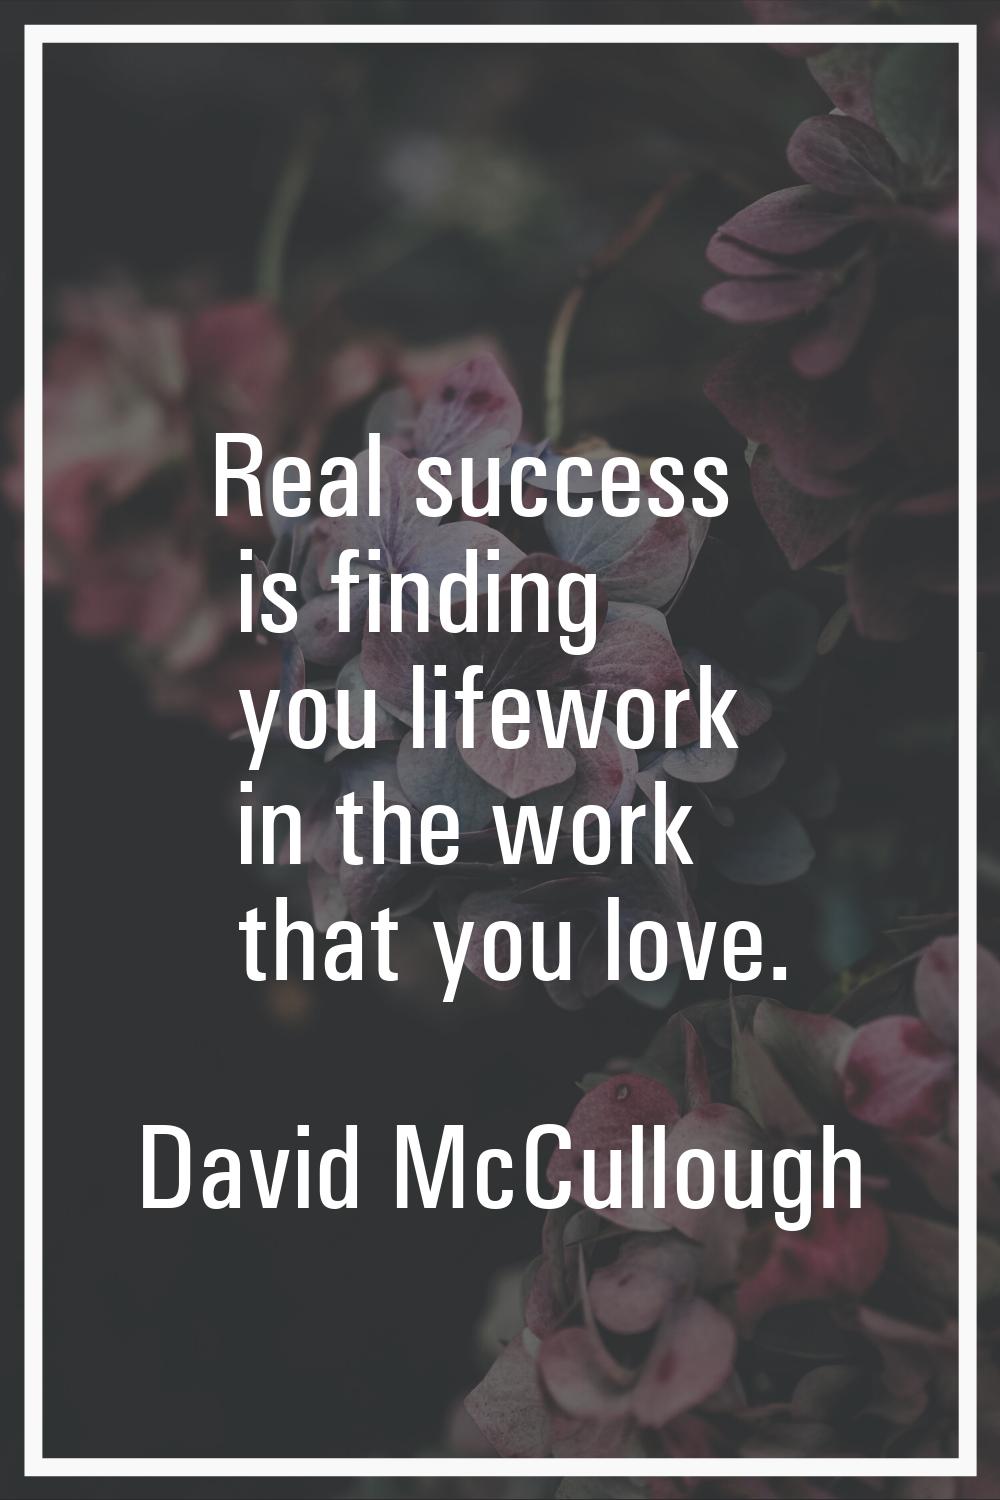 Real success is finding you lifework in the work that you love.